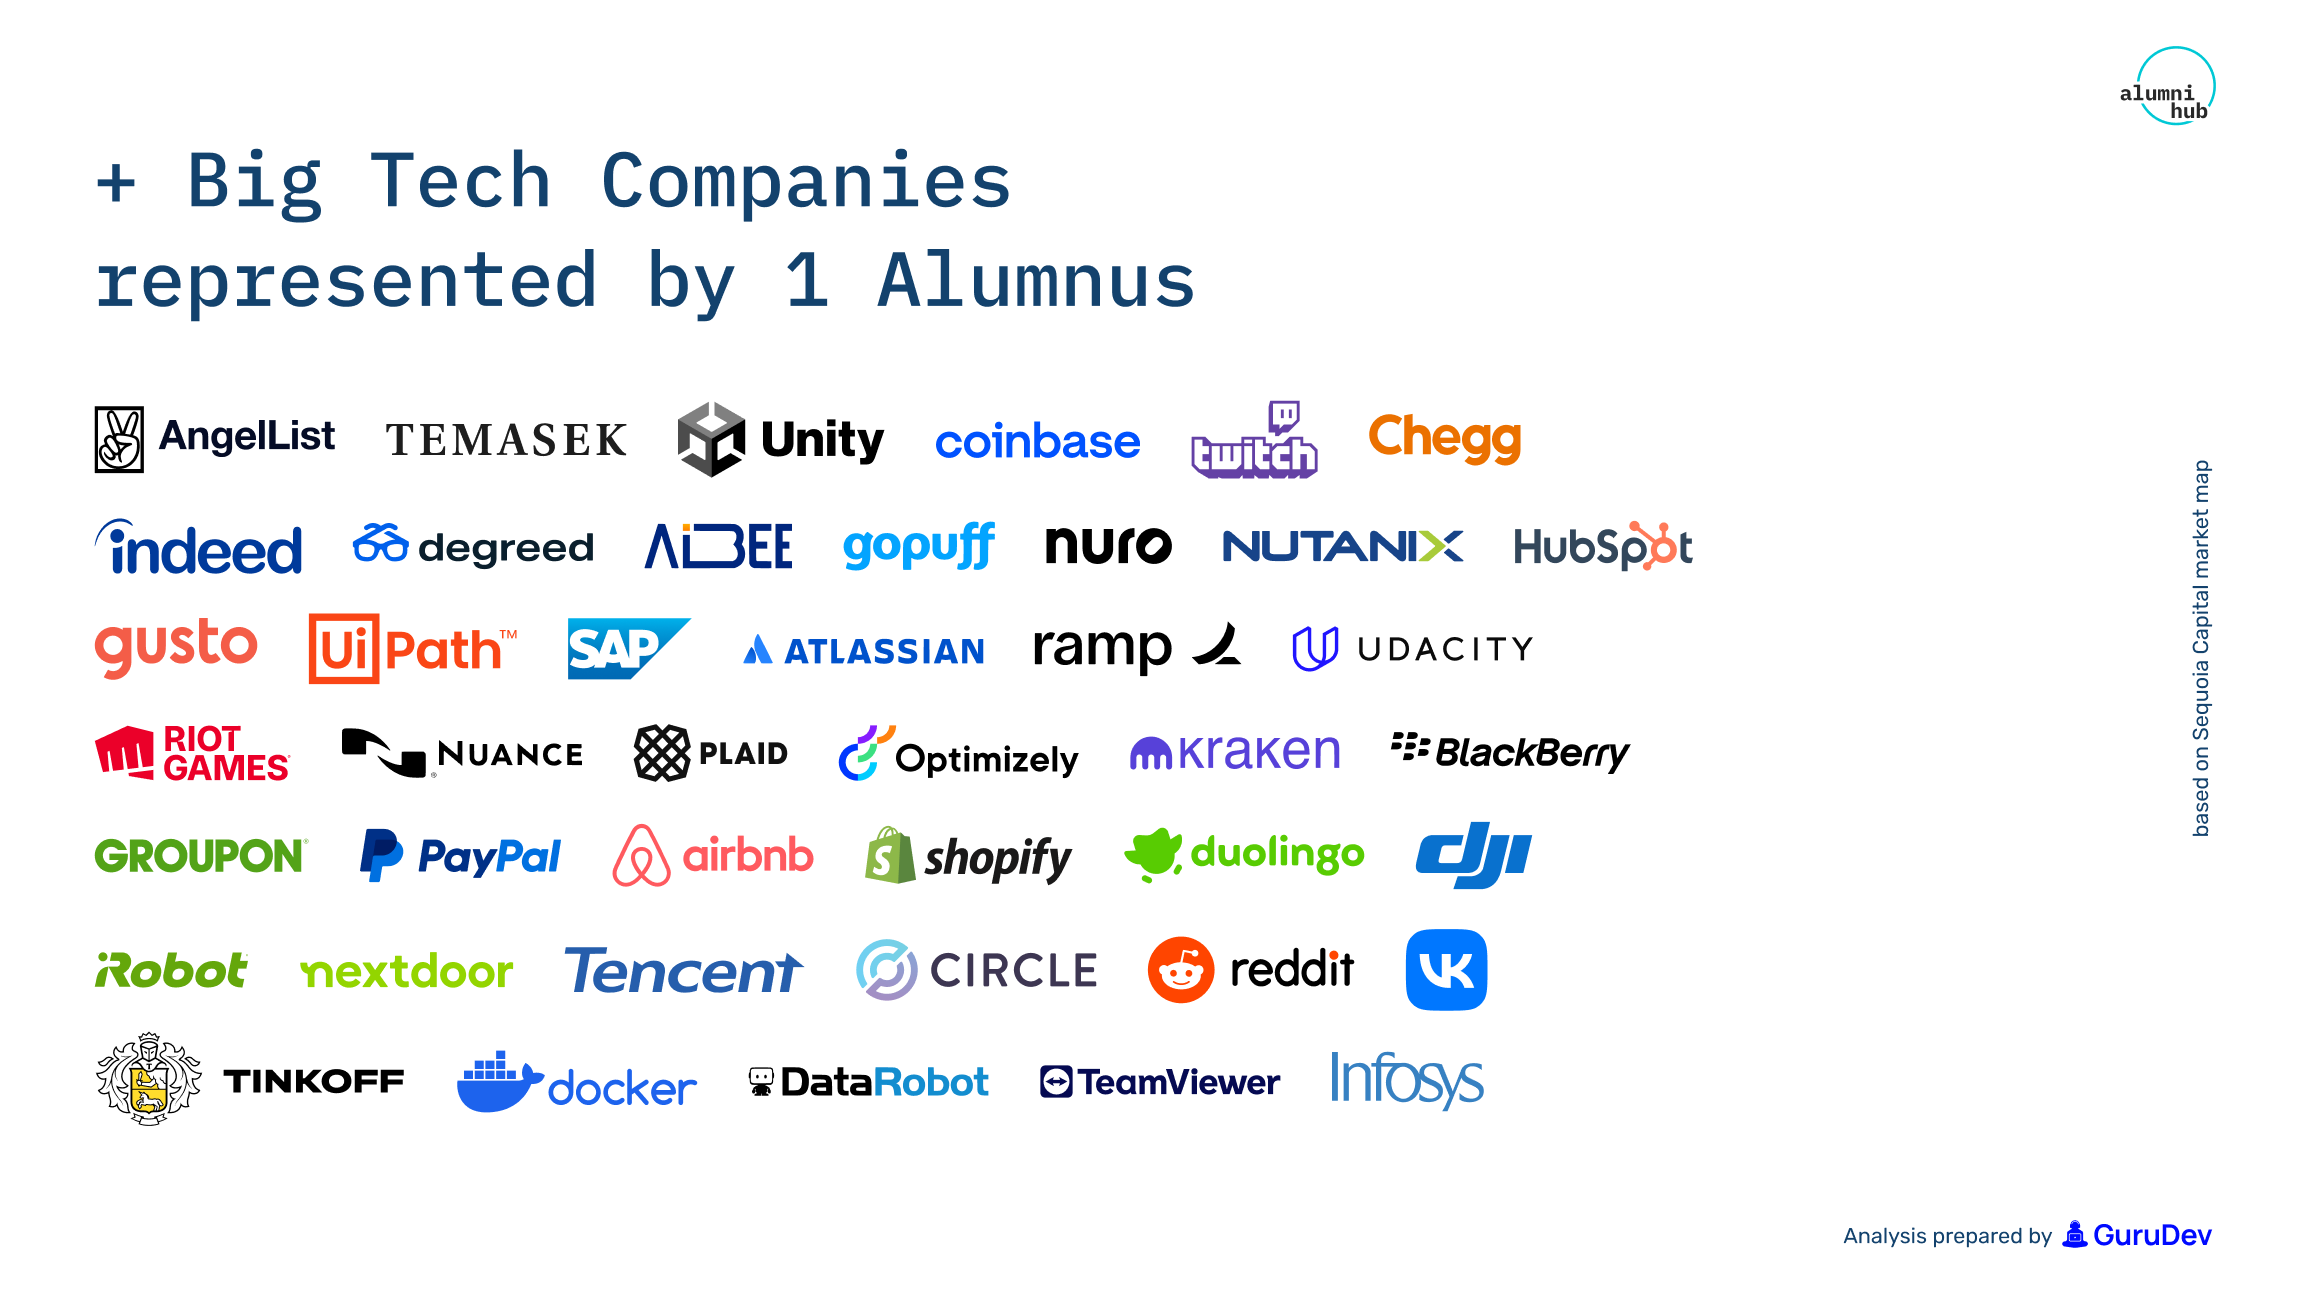 Logos of the Big Tech Companies represented by 1 Alumni in the Sequoia's map.